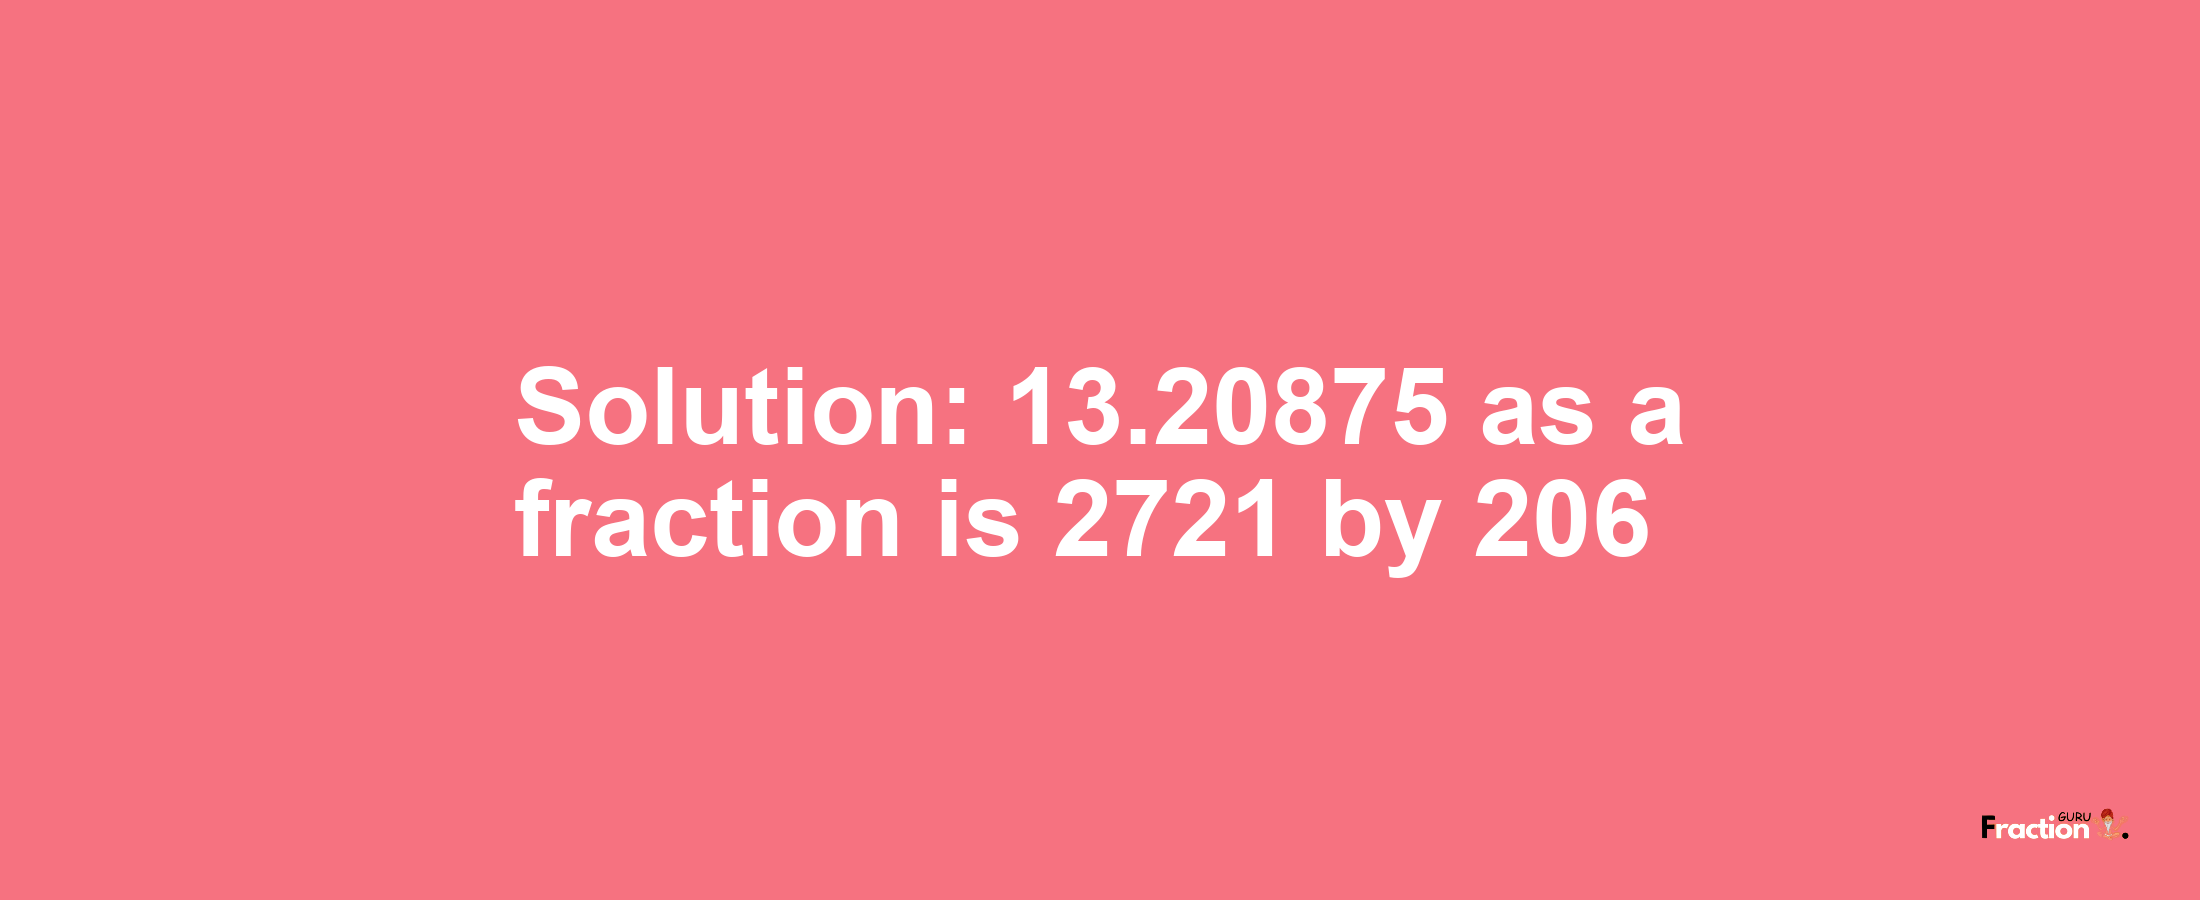 Solution:13.20875 as a fraction is 2721/206